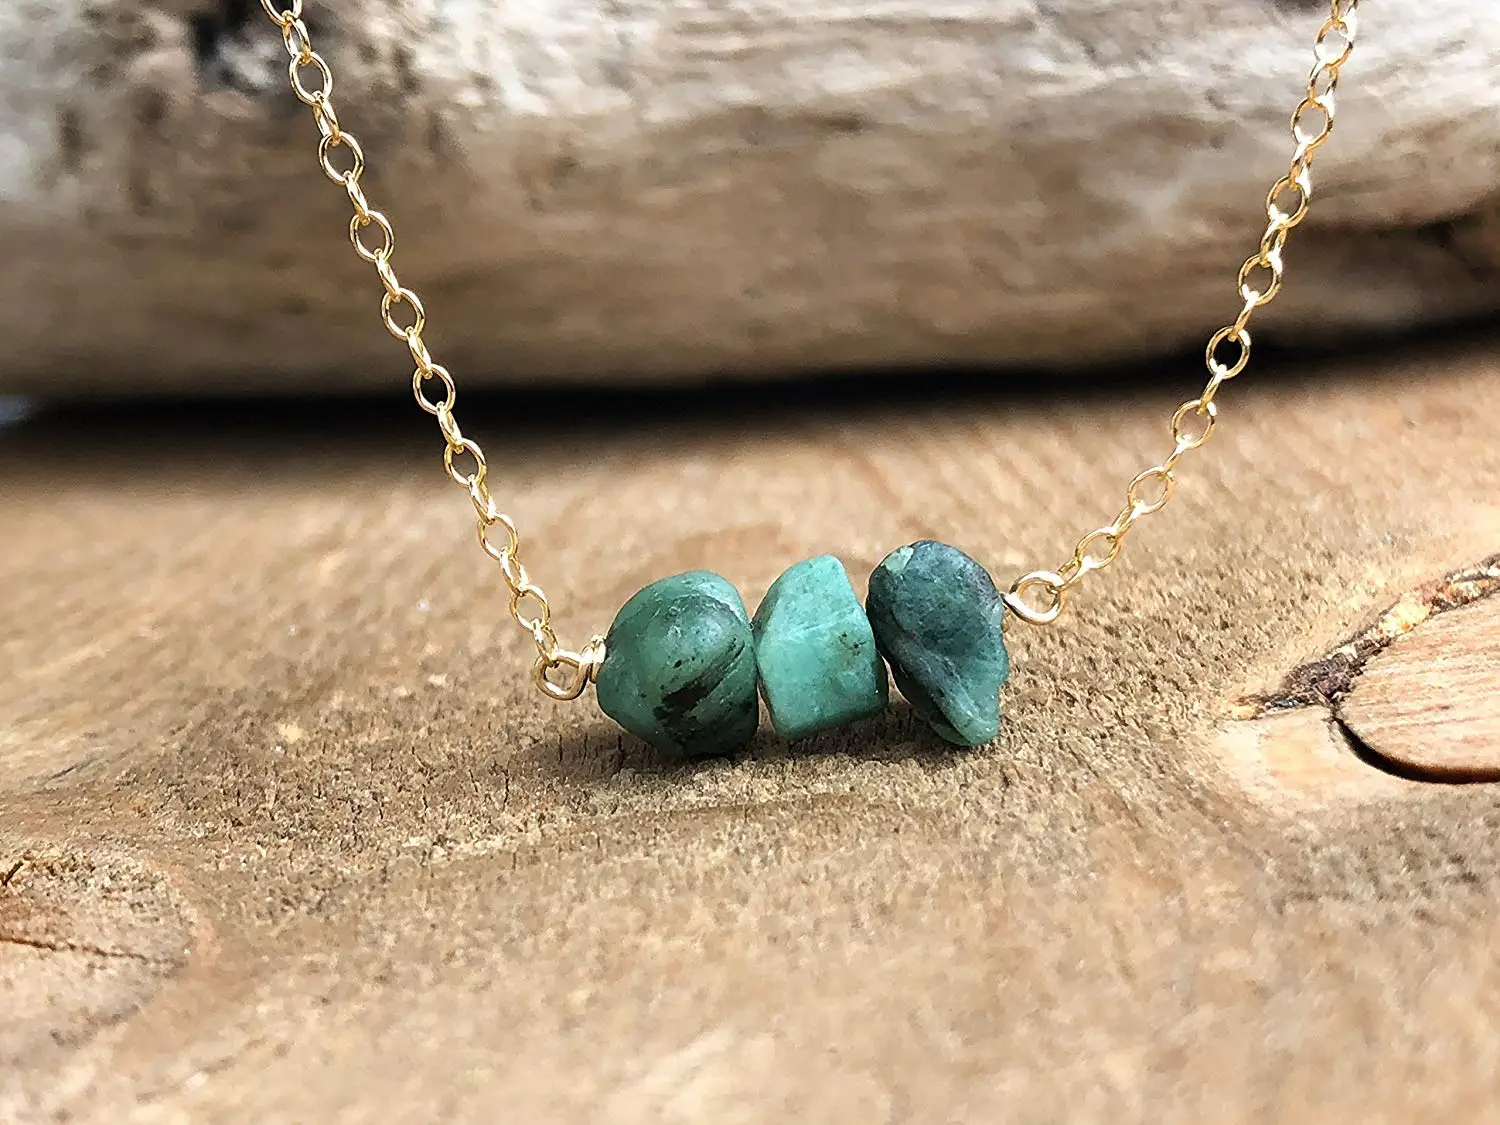 Cheap Raw Emerald Necklace, find Raw Emerald Necklace deals on line at